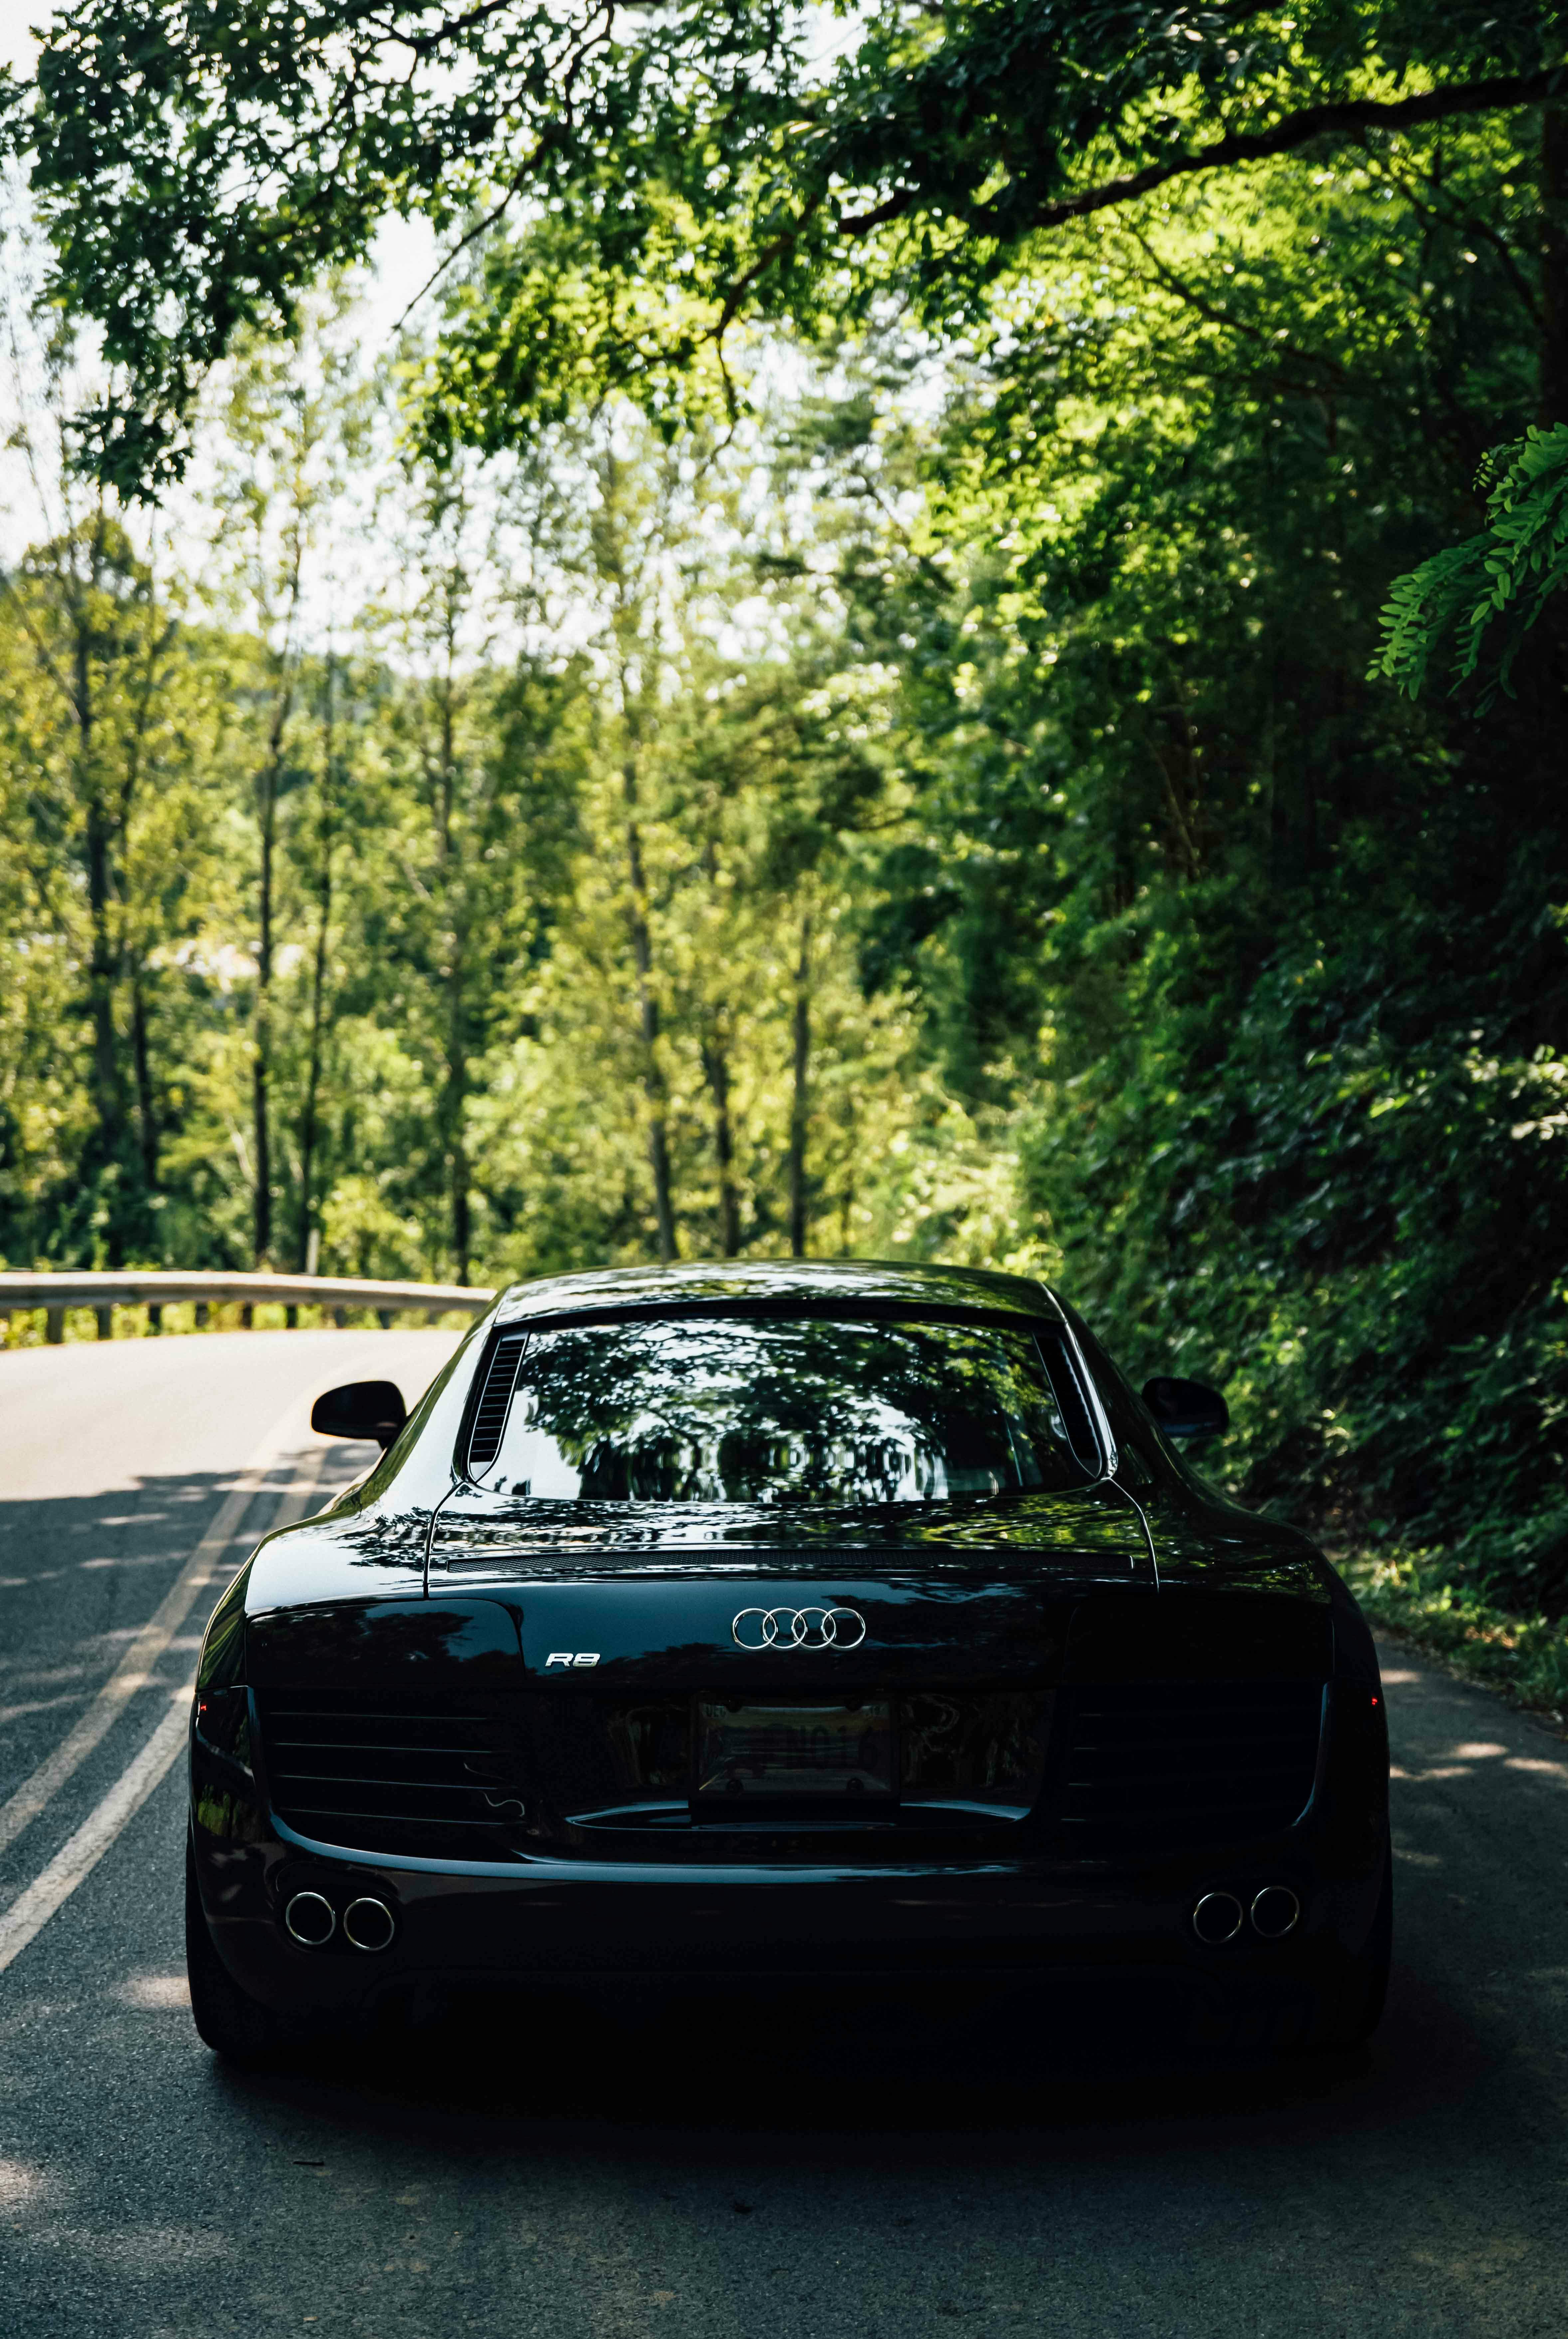 Audi R8 Photos Download The BEST Free Audi R8 Stock Photos  HD Images